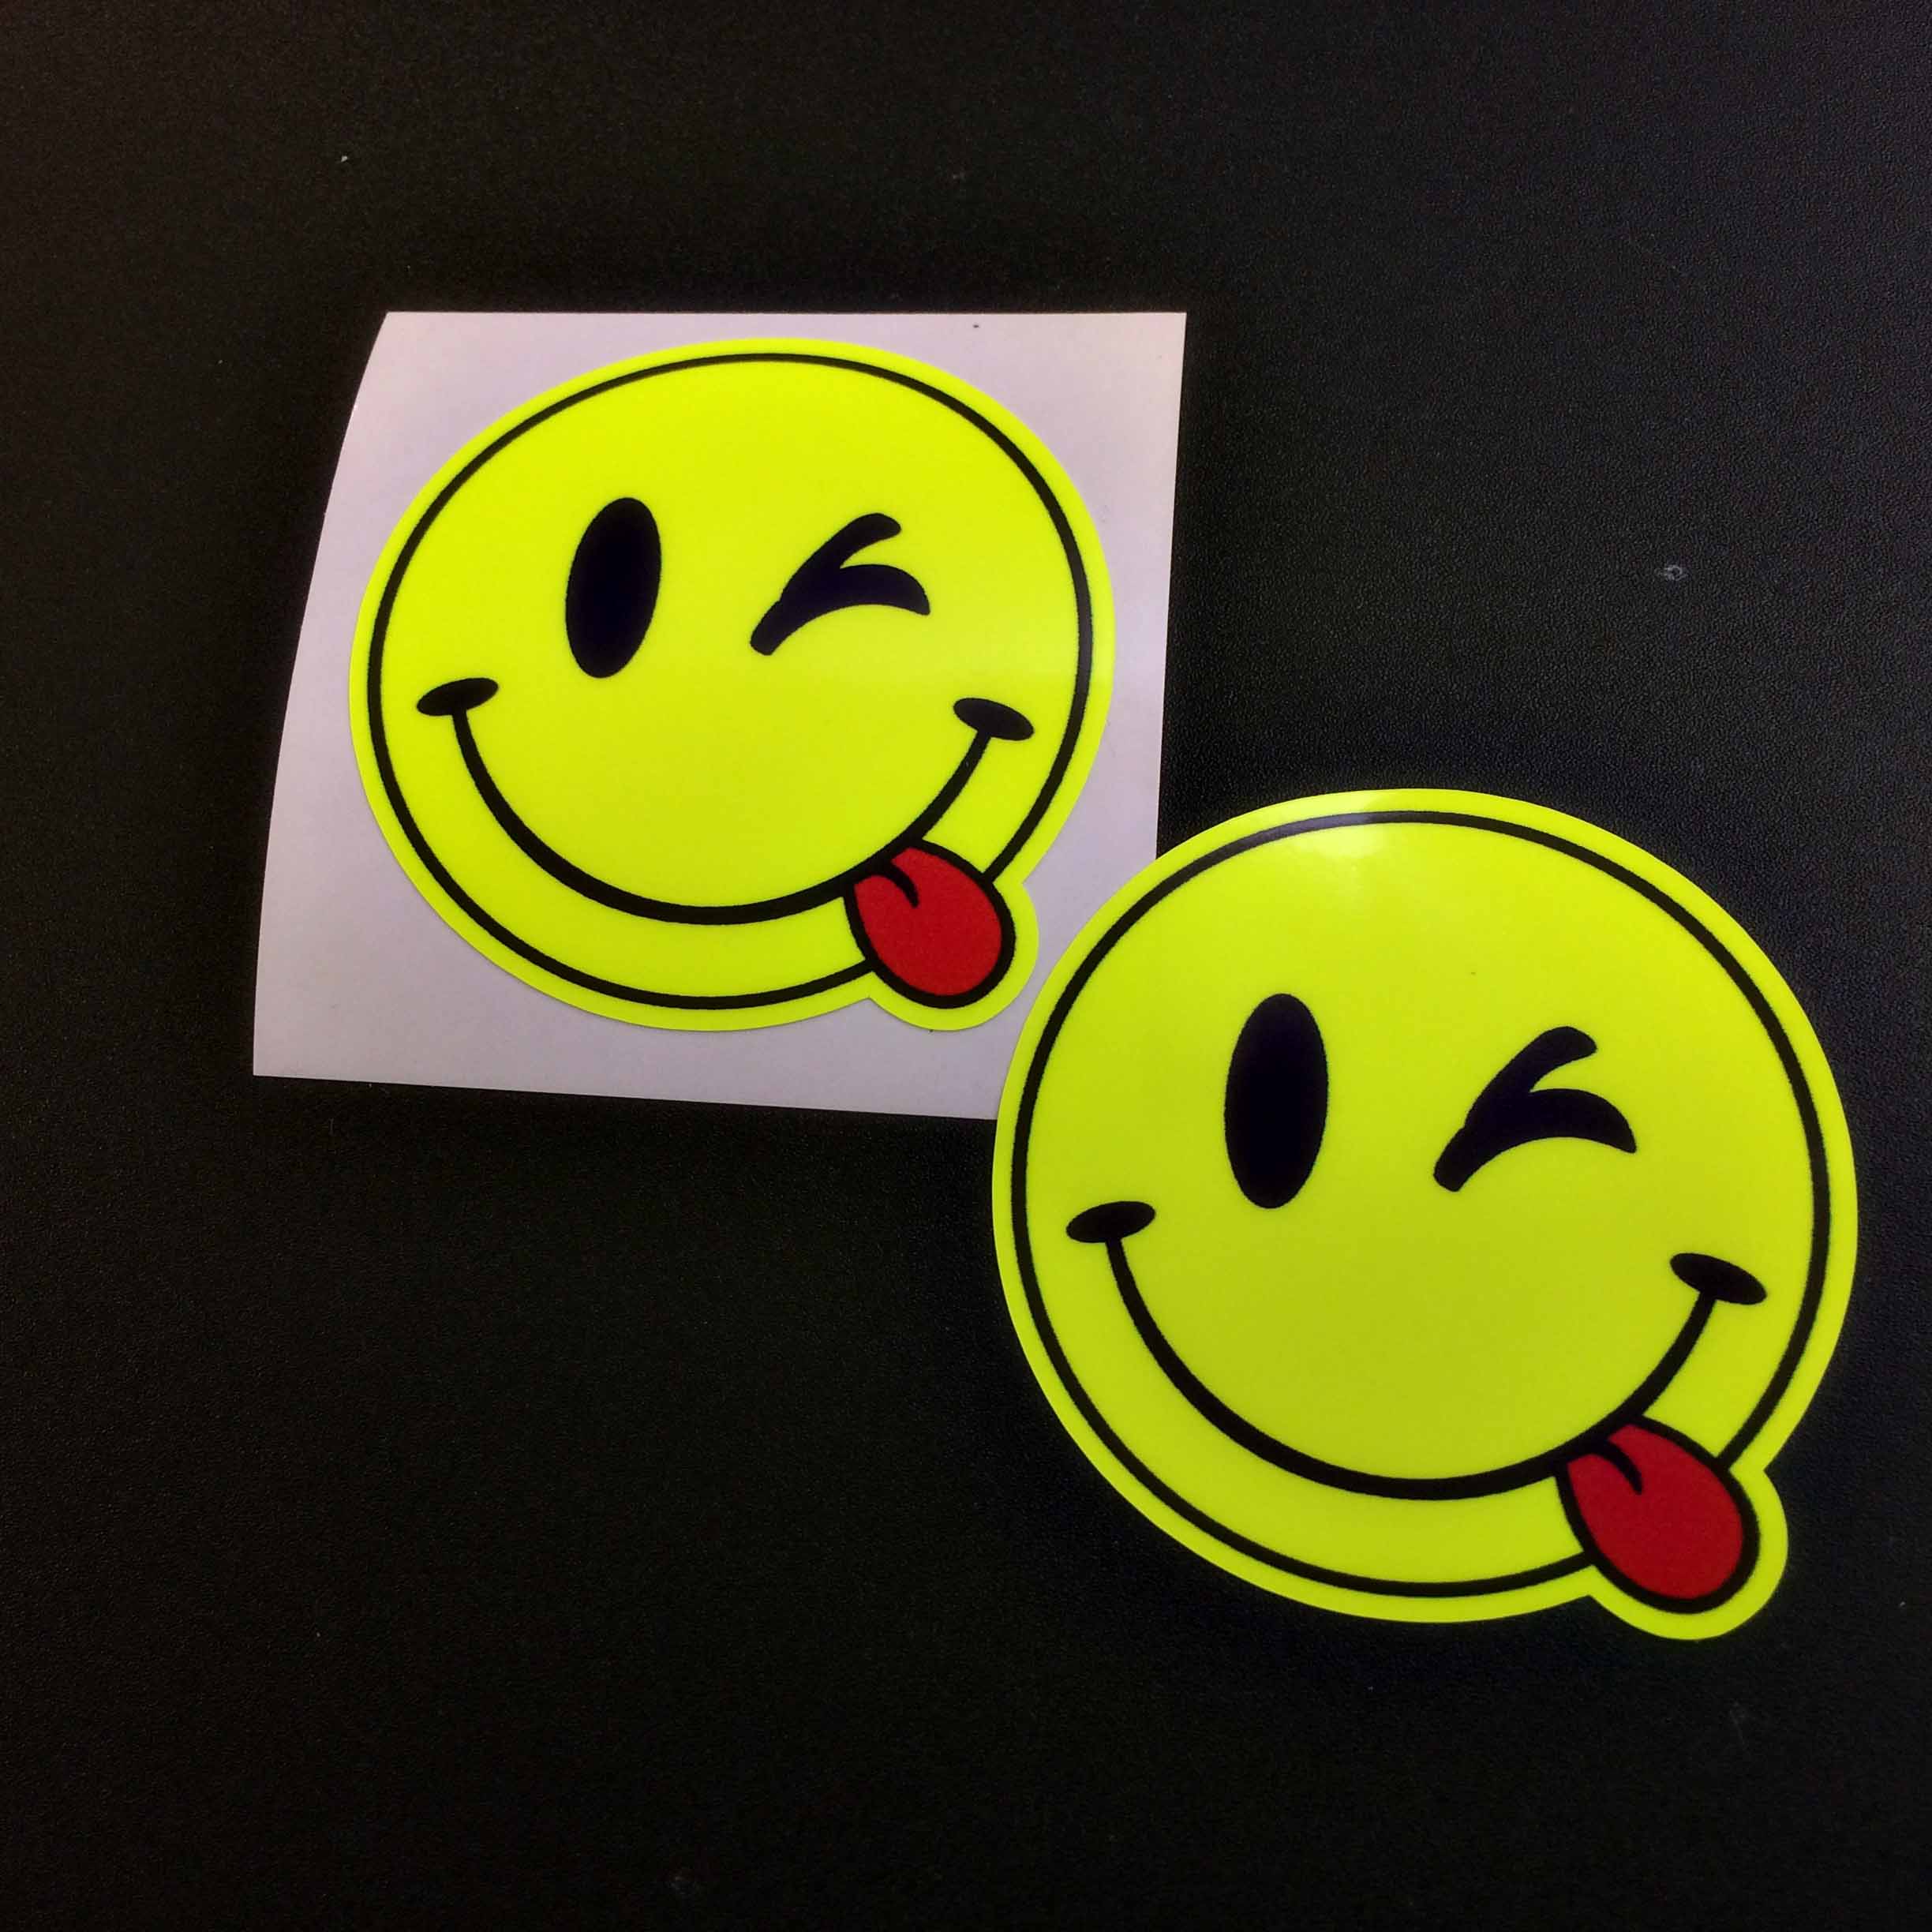 A fluorescent yellow round smiling face. A red tongue is hanging out of the corner of the mouth and one eye is winking.